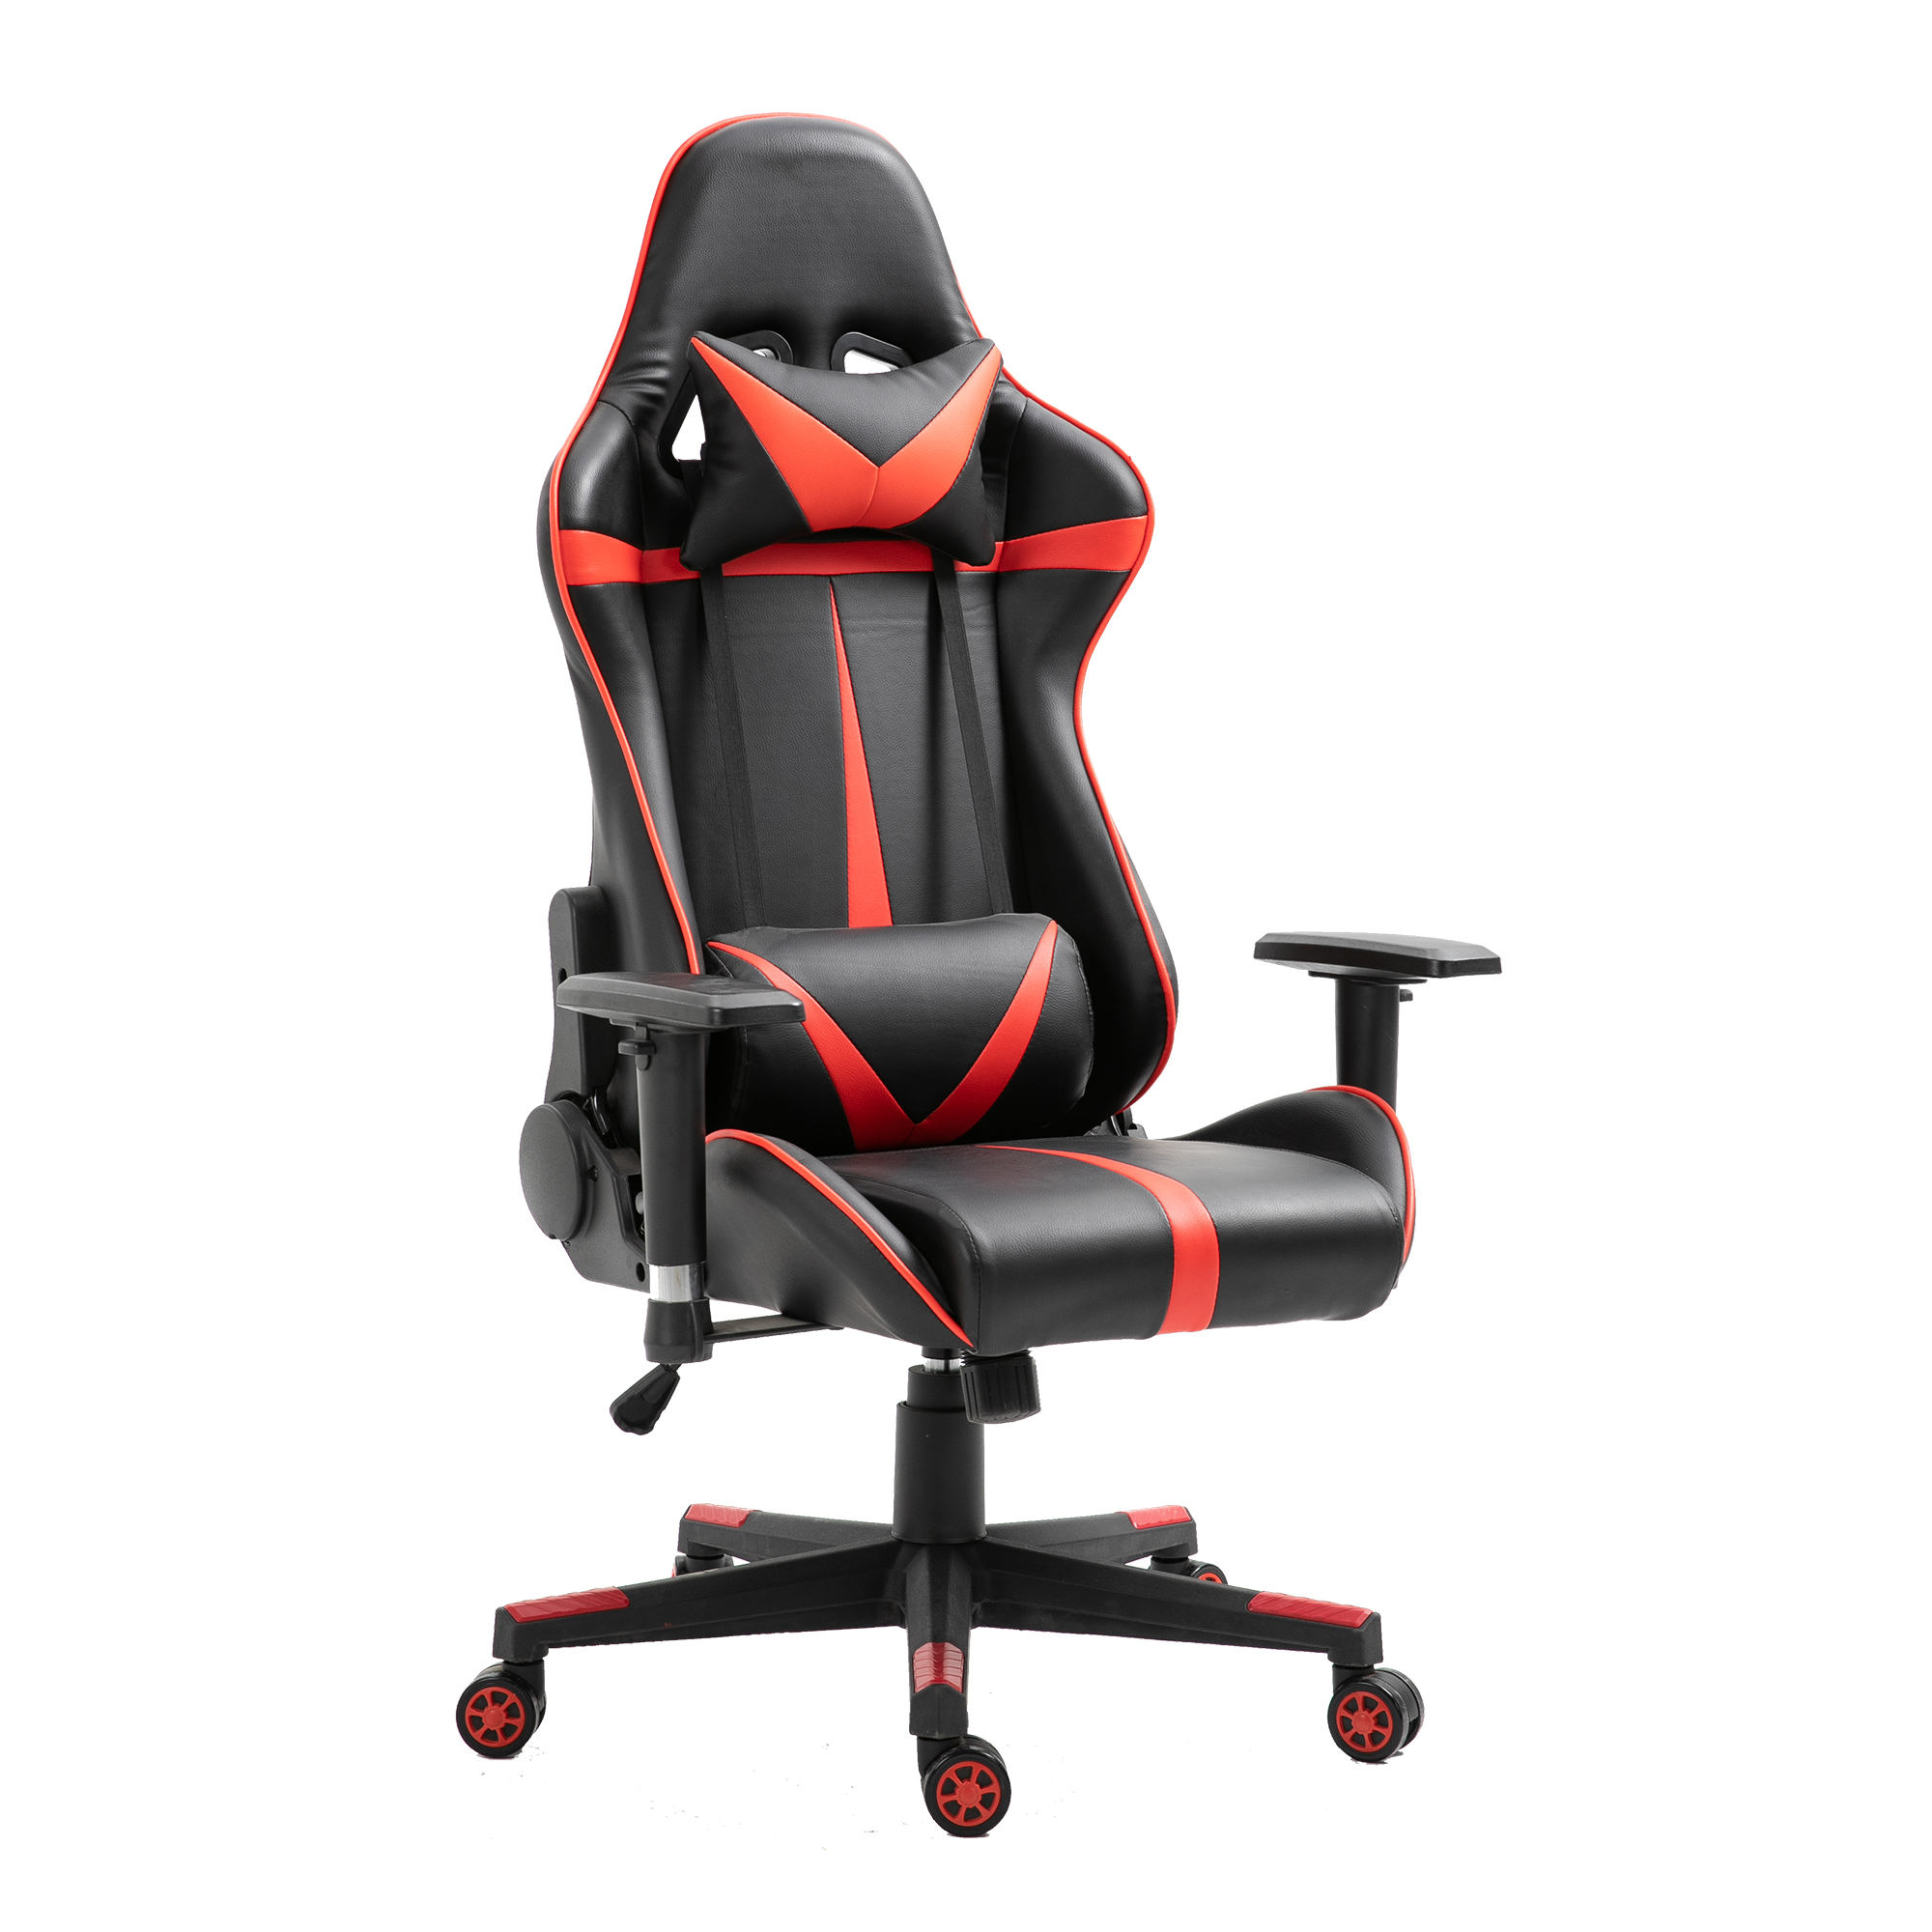 High quality Ergonomic Silla Gamer luxury swivel cheap pu leather racing home PC computer office chair gaming chair Featured Image